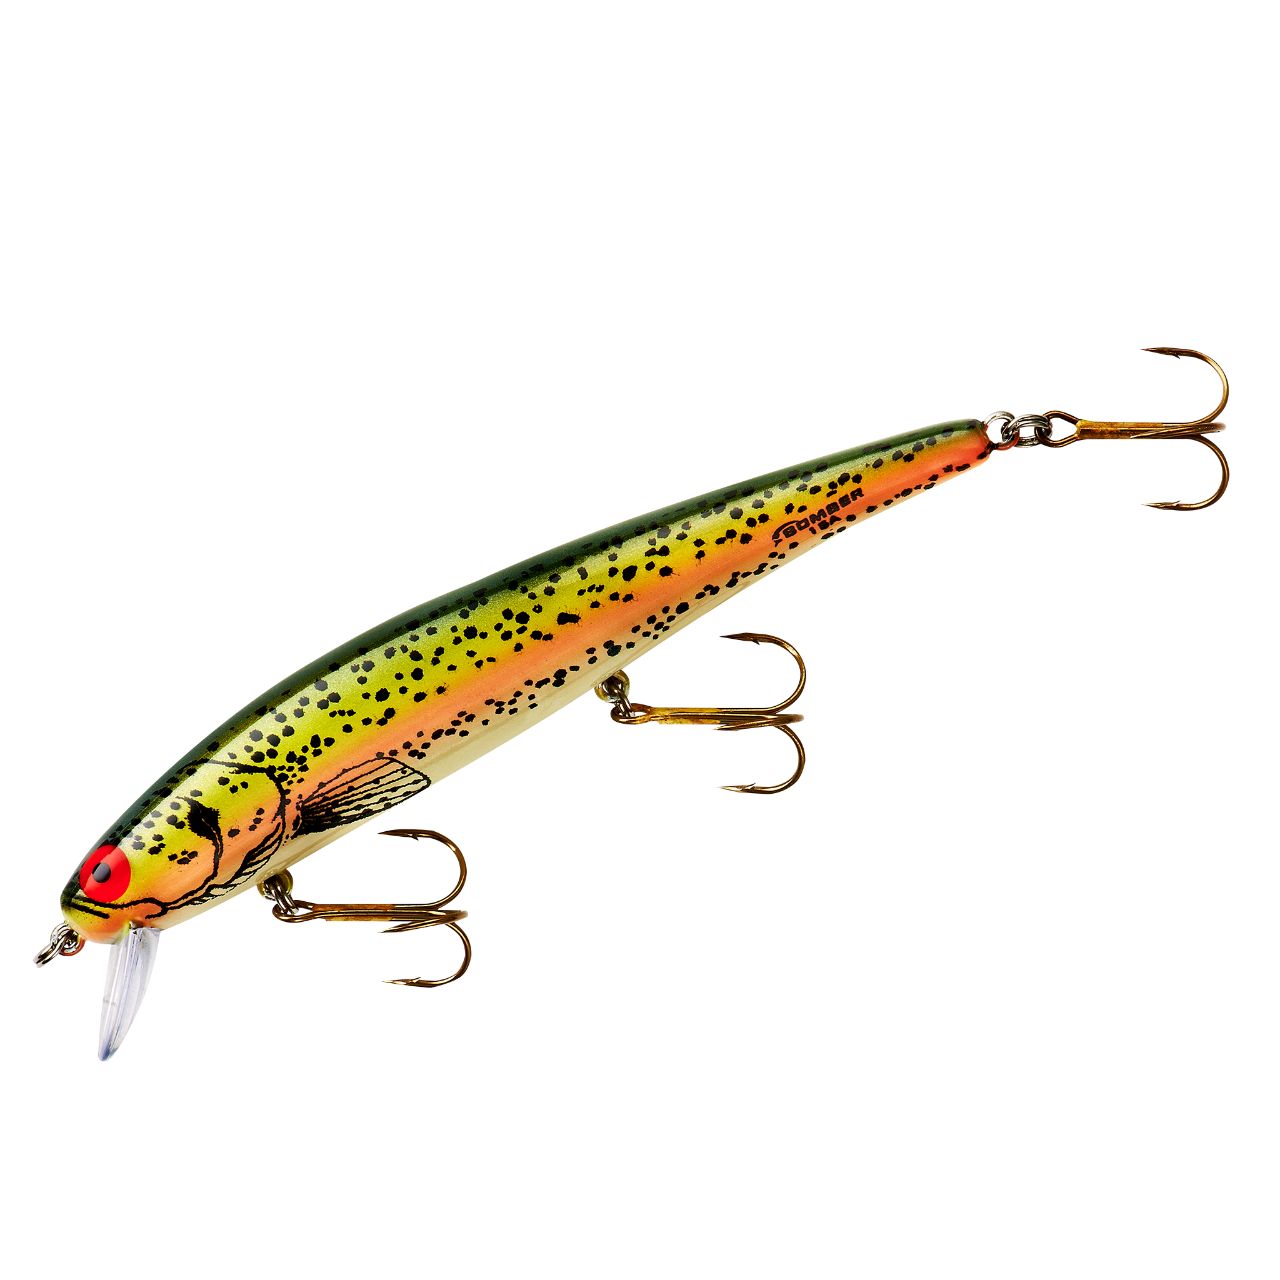 Bomber Long A Rattle Crankbait Fishing Lure – Luce Coffee Roasters